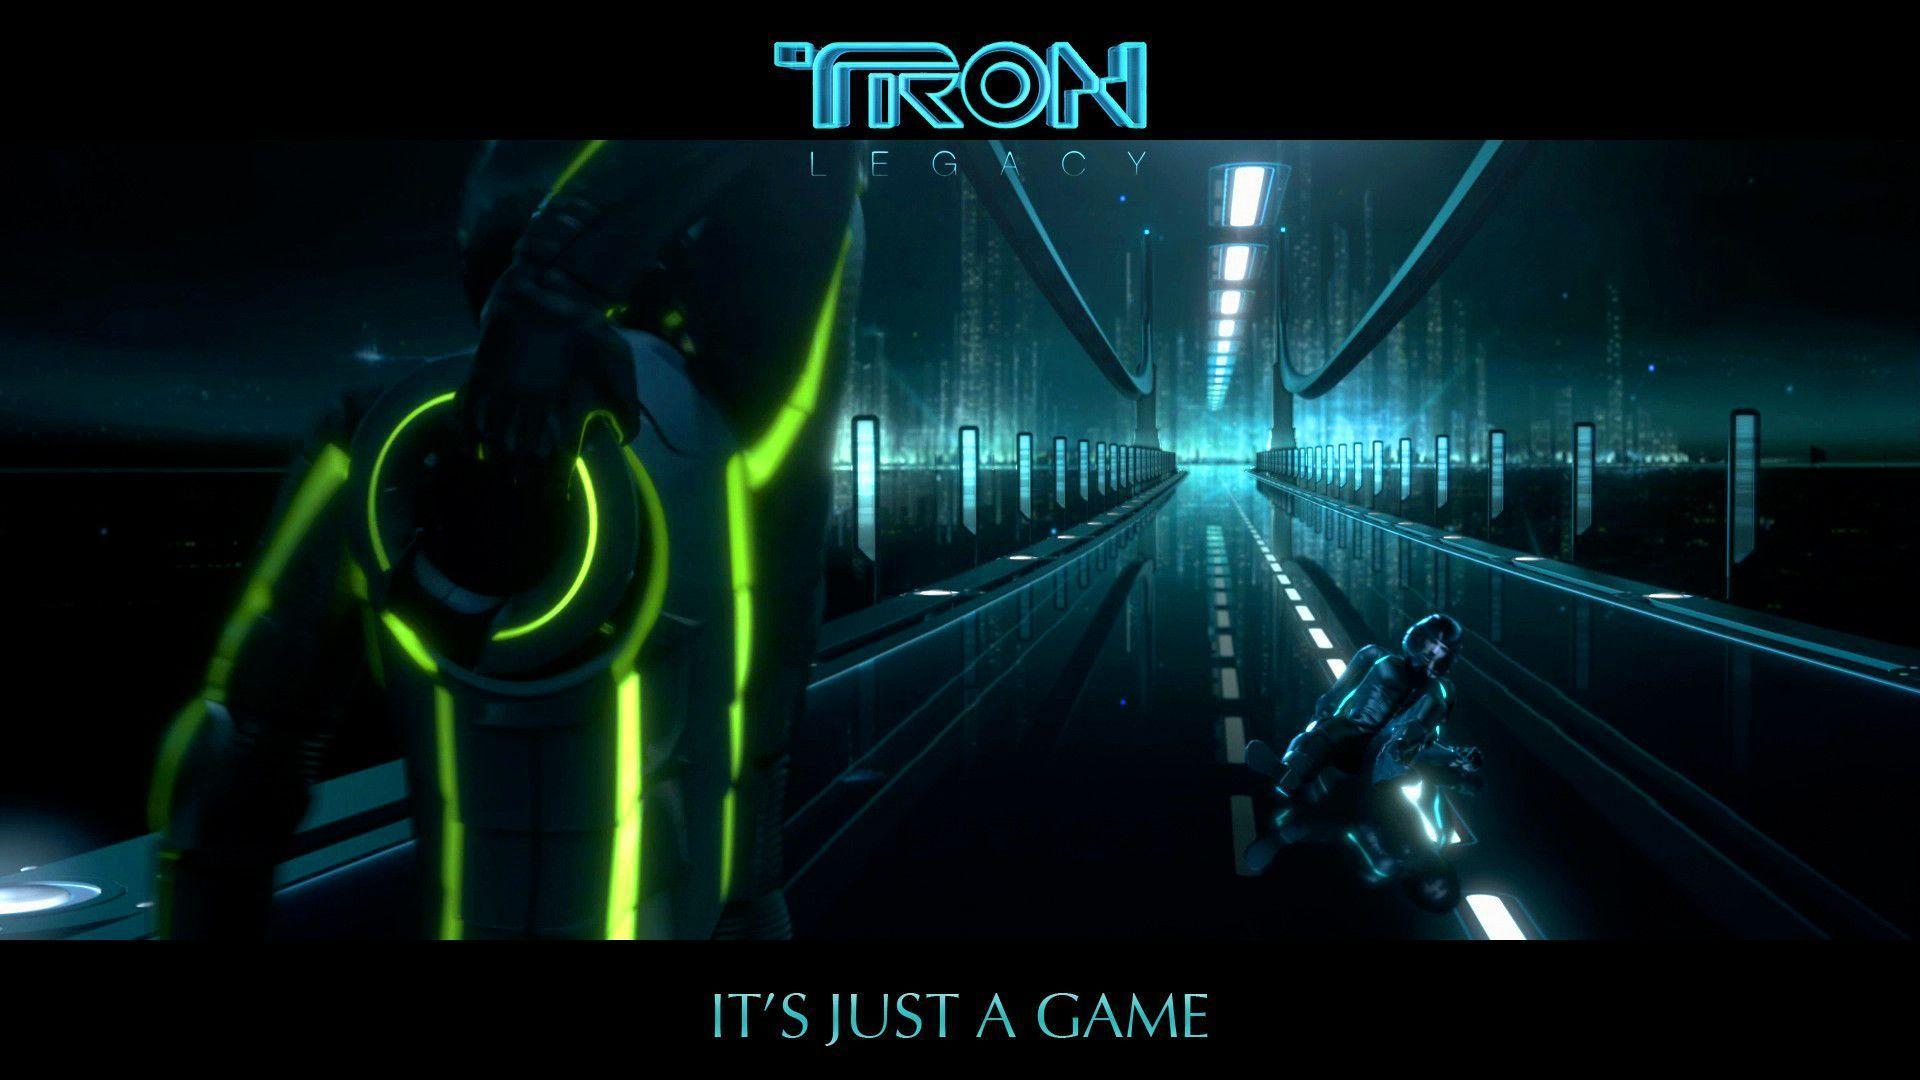 Download tron legacy high definition image wallpaper background